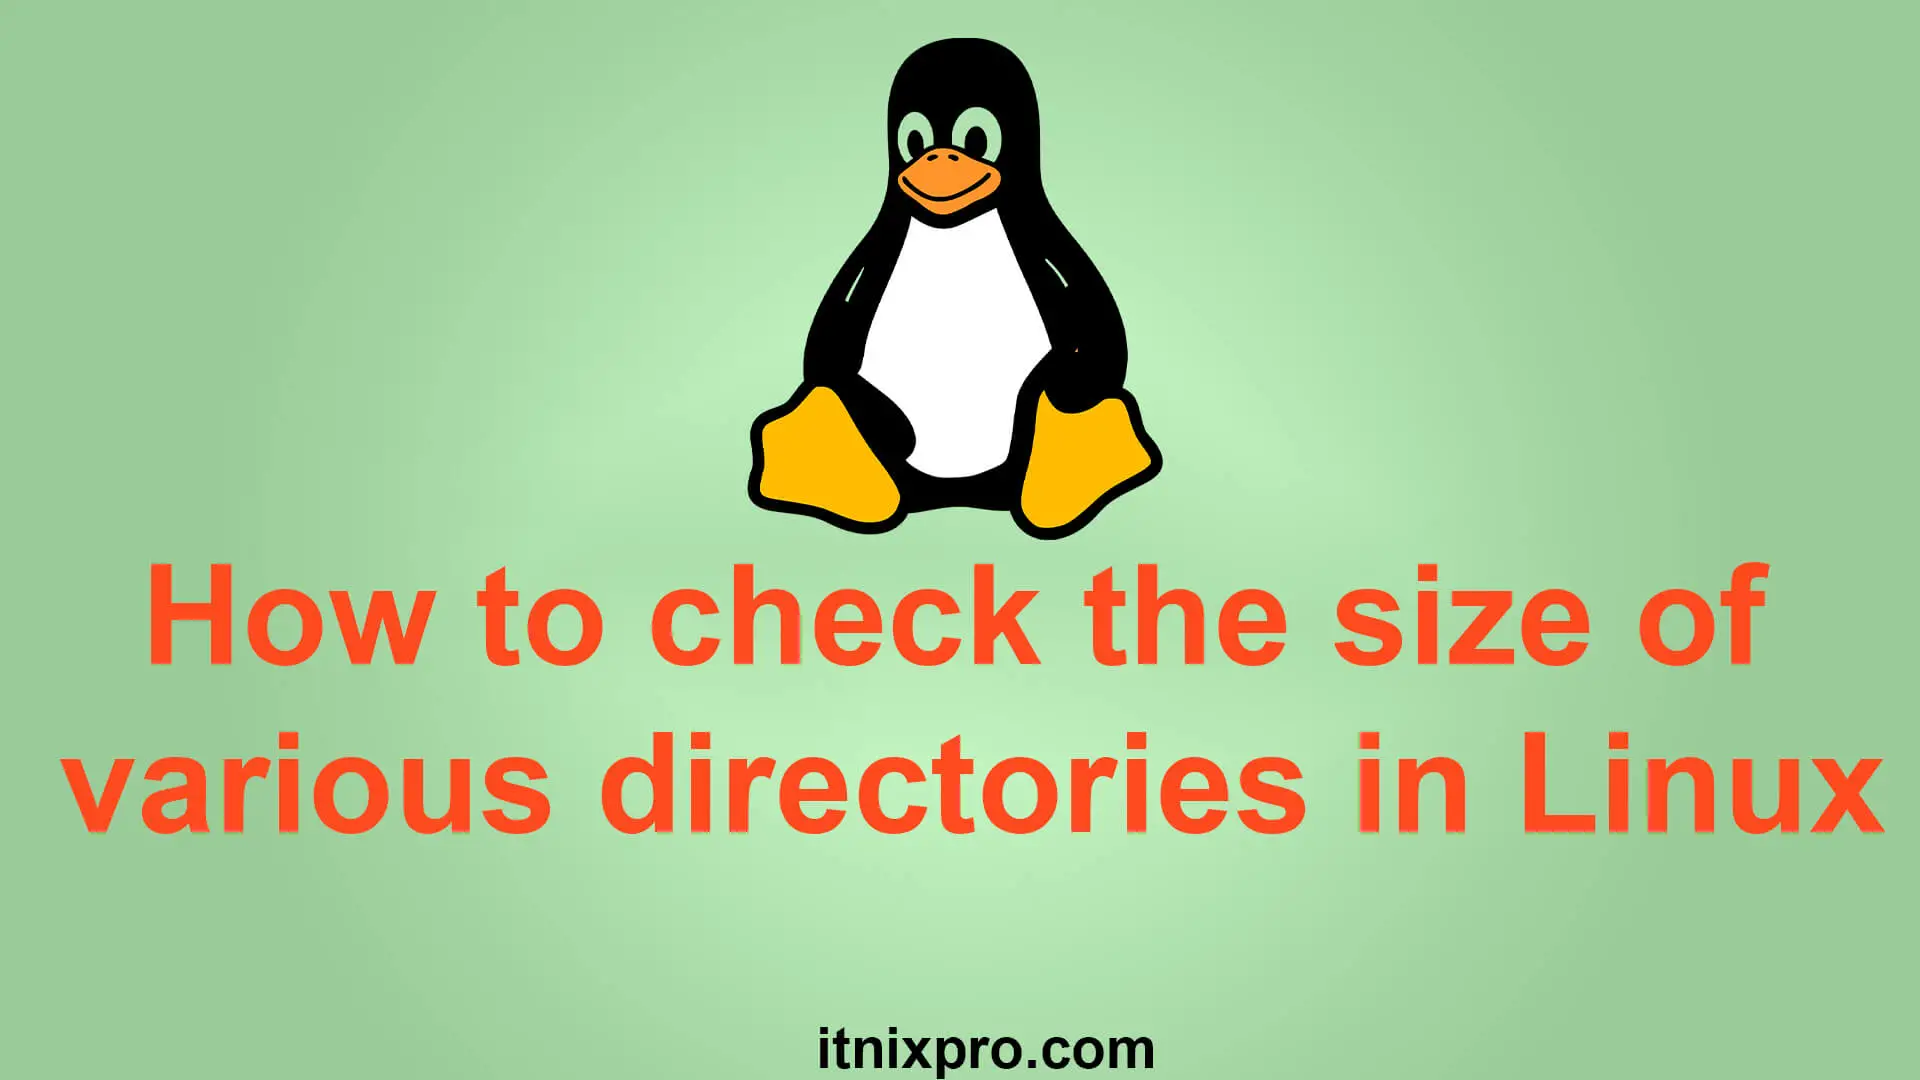 How to check the size of various directories in Linux